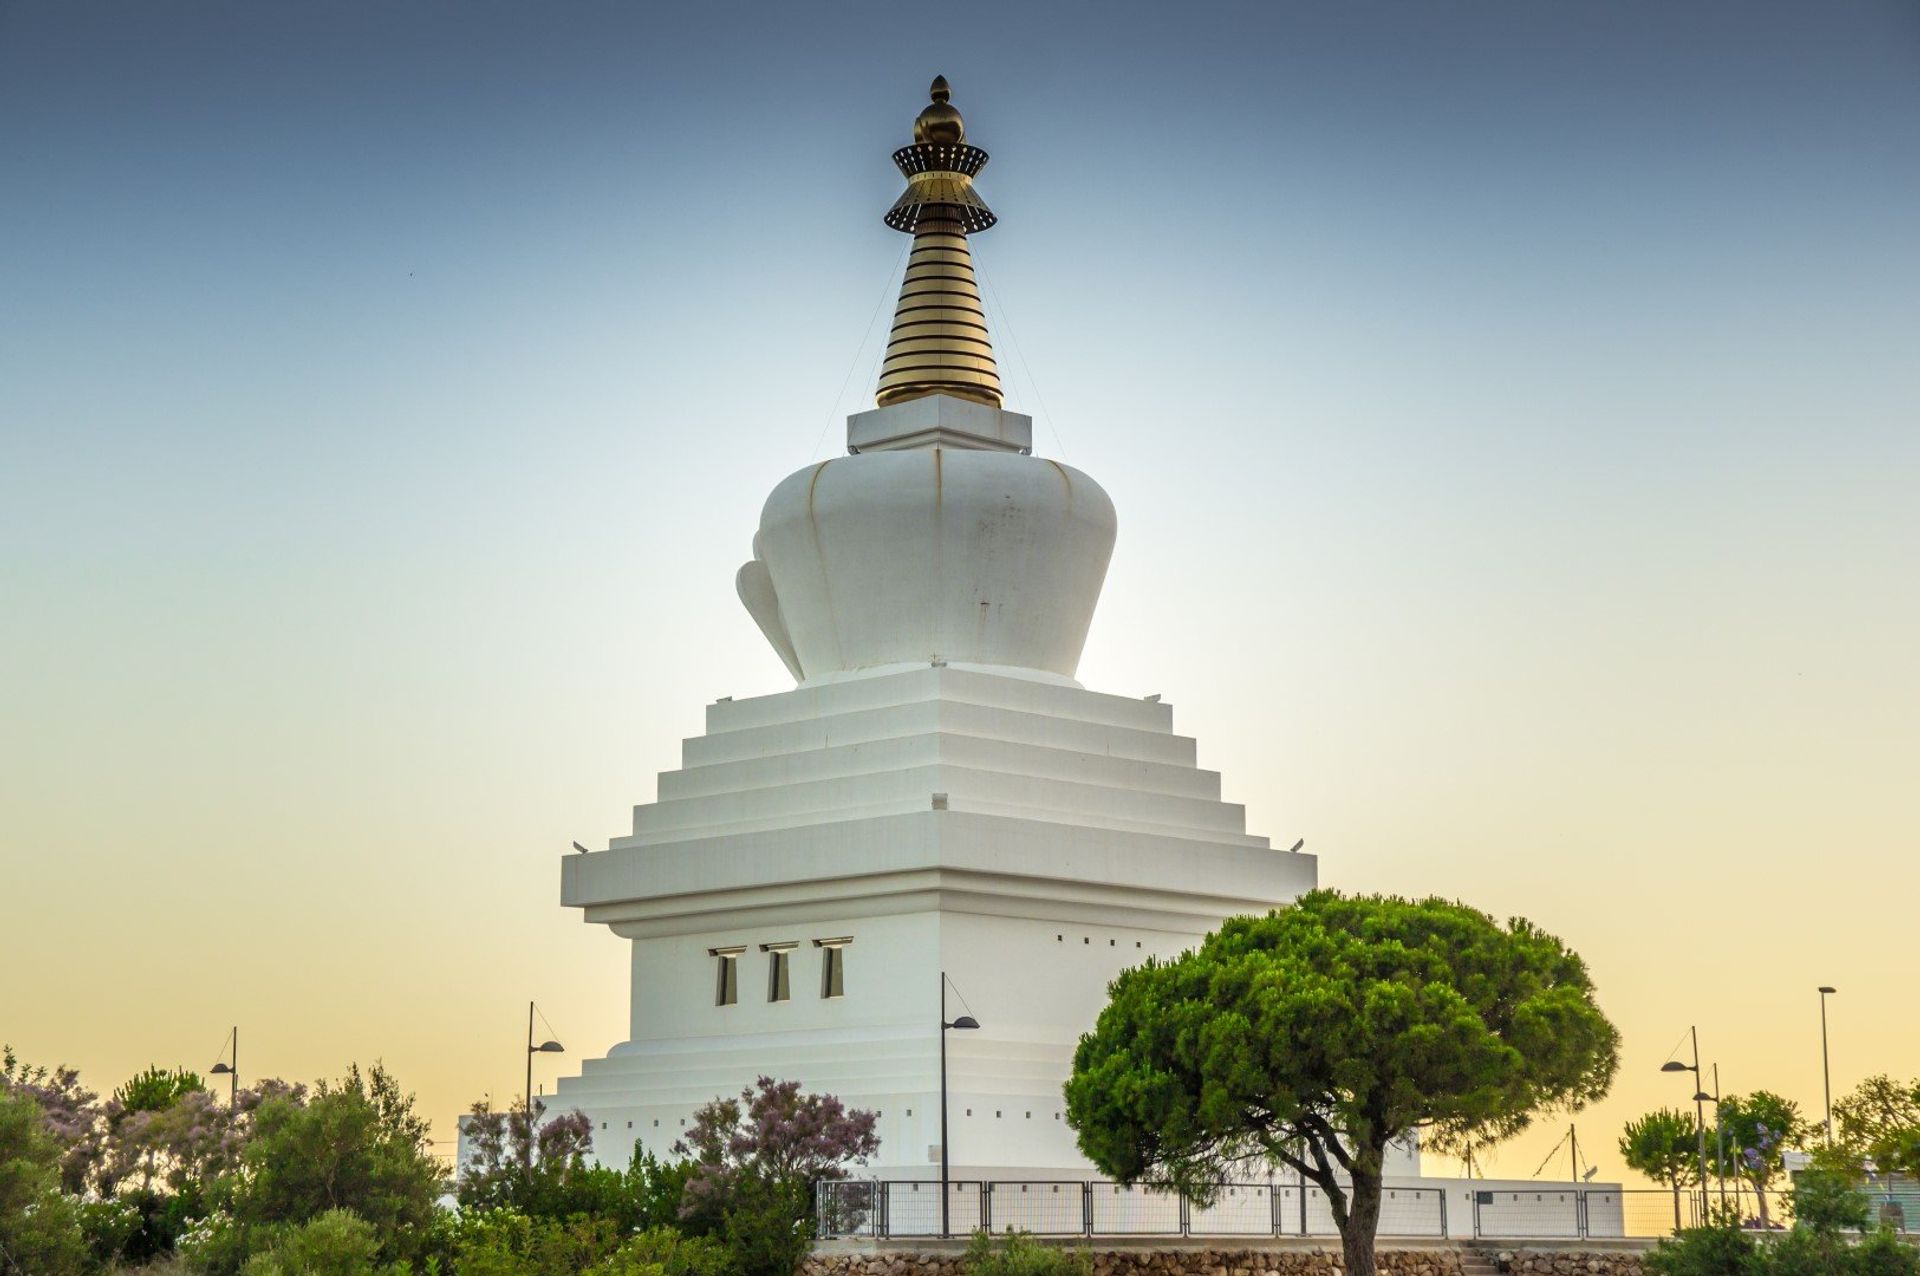 White represents peace and tranquility. The stunning Buddhist monument in Benalmádena